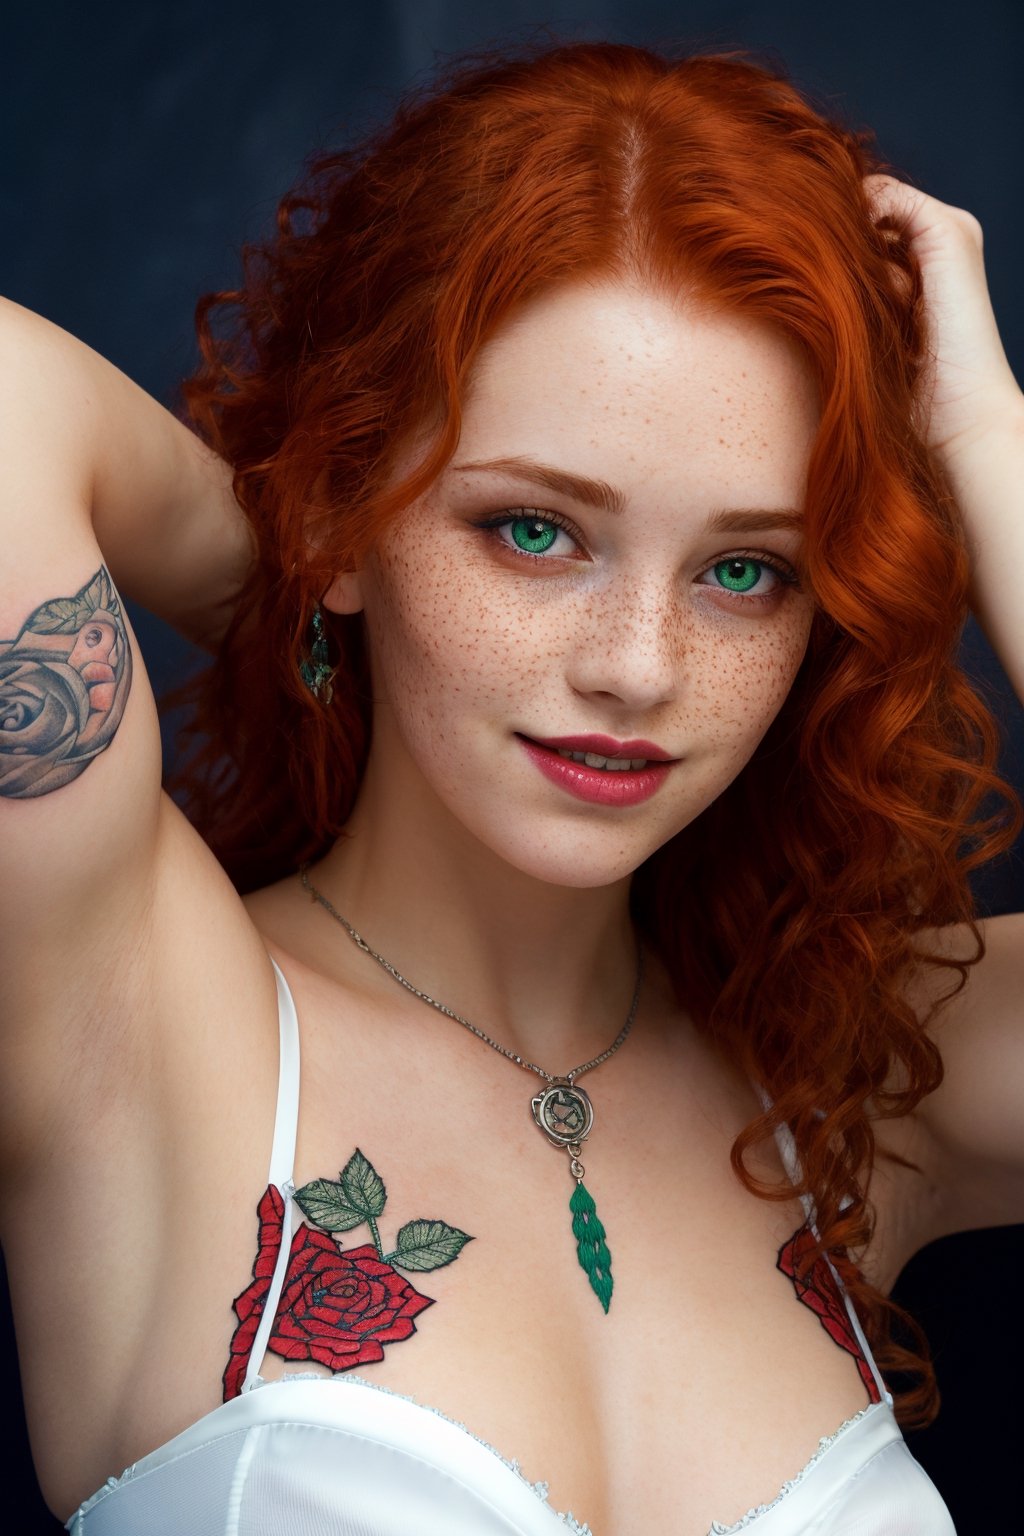 absurd, RAW photo, highest quality, (masterpiece: 1.3), high detail RAW color photo, professional photo, extremely detailed 8k CG wallpaper unit, photo-realistic, realistic, RAW photo, masterpiece , best quality, highres, illustration, 1girl, 16 YEARS OLD, short, tiny girl, skinny, white, redhead, red hair, red hair with curls, wavy hair, curly hair, Average length, tied up hair, slender legs, perfect beautiful face with freckles, cardune lips, beautiful realistic eyes, green right eye, blue left eye, heterochromia, pale skin, detailed skin texture, flat breasts, very small, small ass. Red roses tattooed on the shoulders, tattoos of pagan symbols on the forearms and hands. Slim, slender body. Red-haired. Smile. Witch style. Pagan style, Celtic, Wiccan. Scottish. She looks amazing. (Blue medieval dress with embroidery, white corset with embroidery, necklace with pentagram pendant, detailed design), home, night.